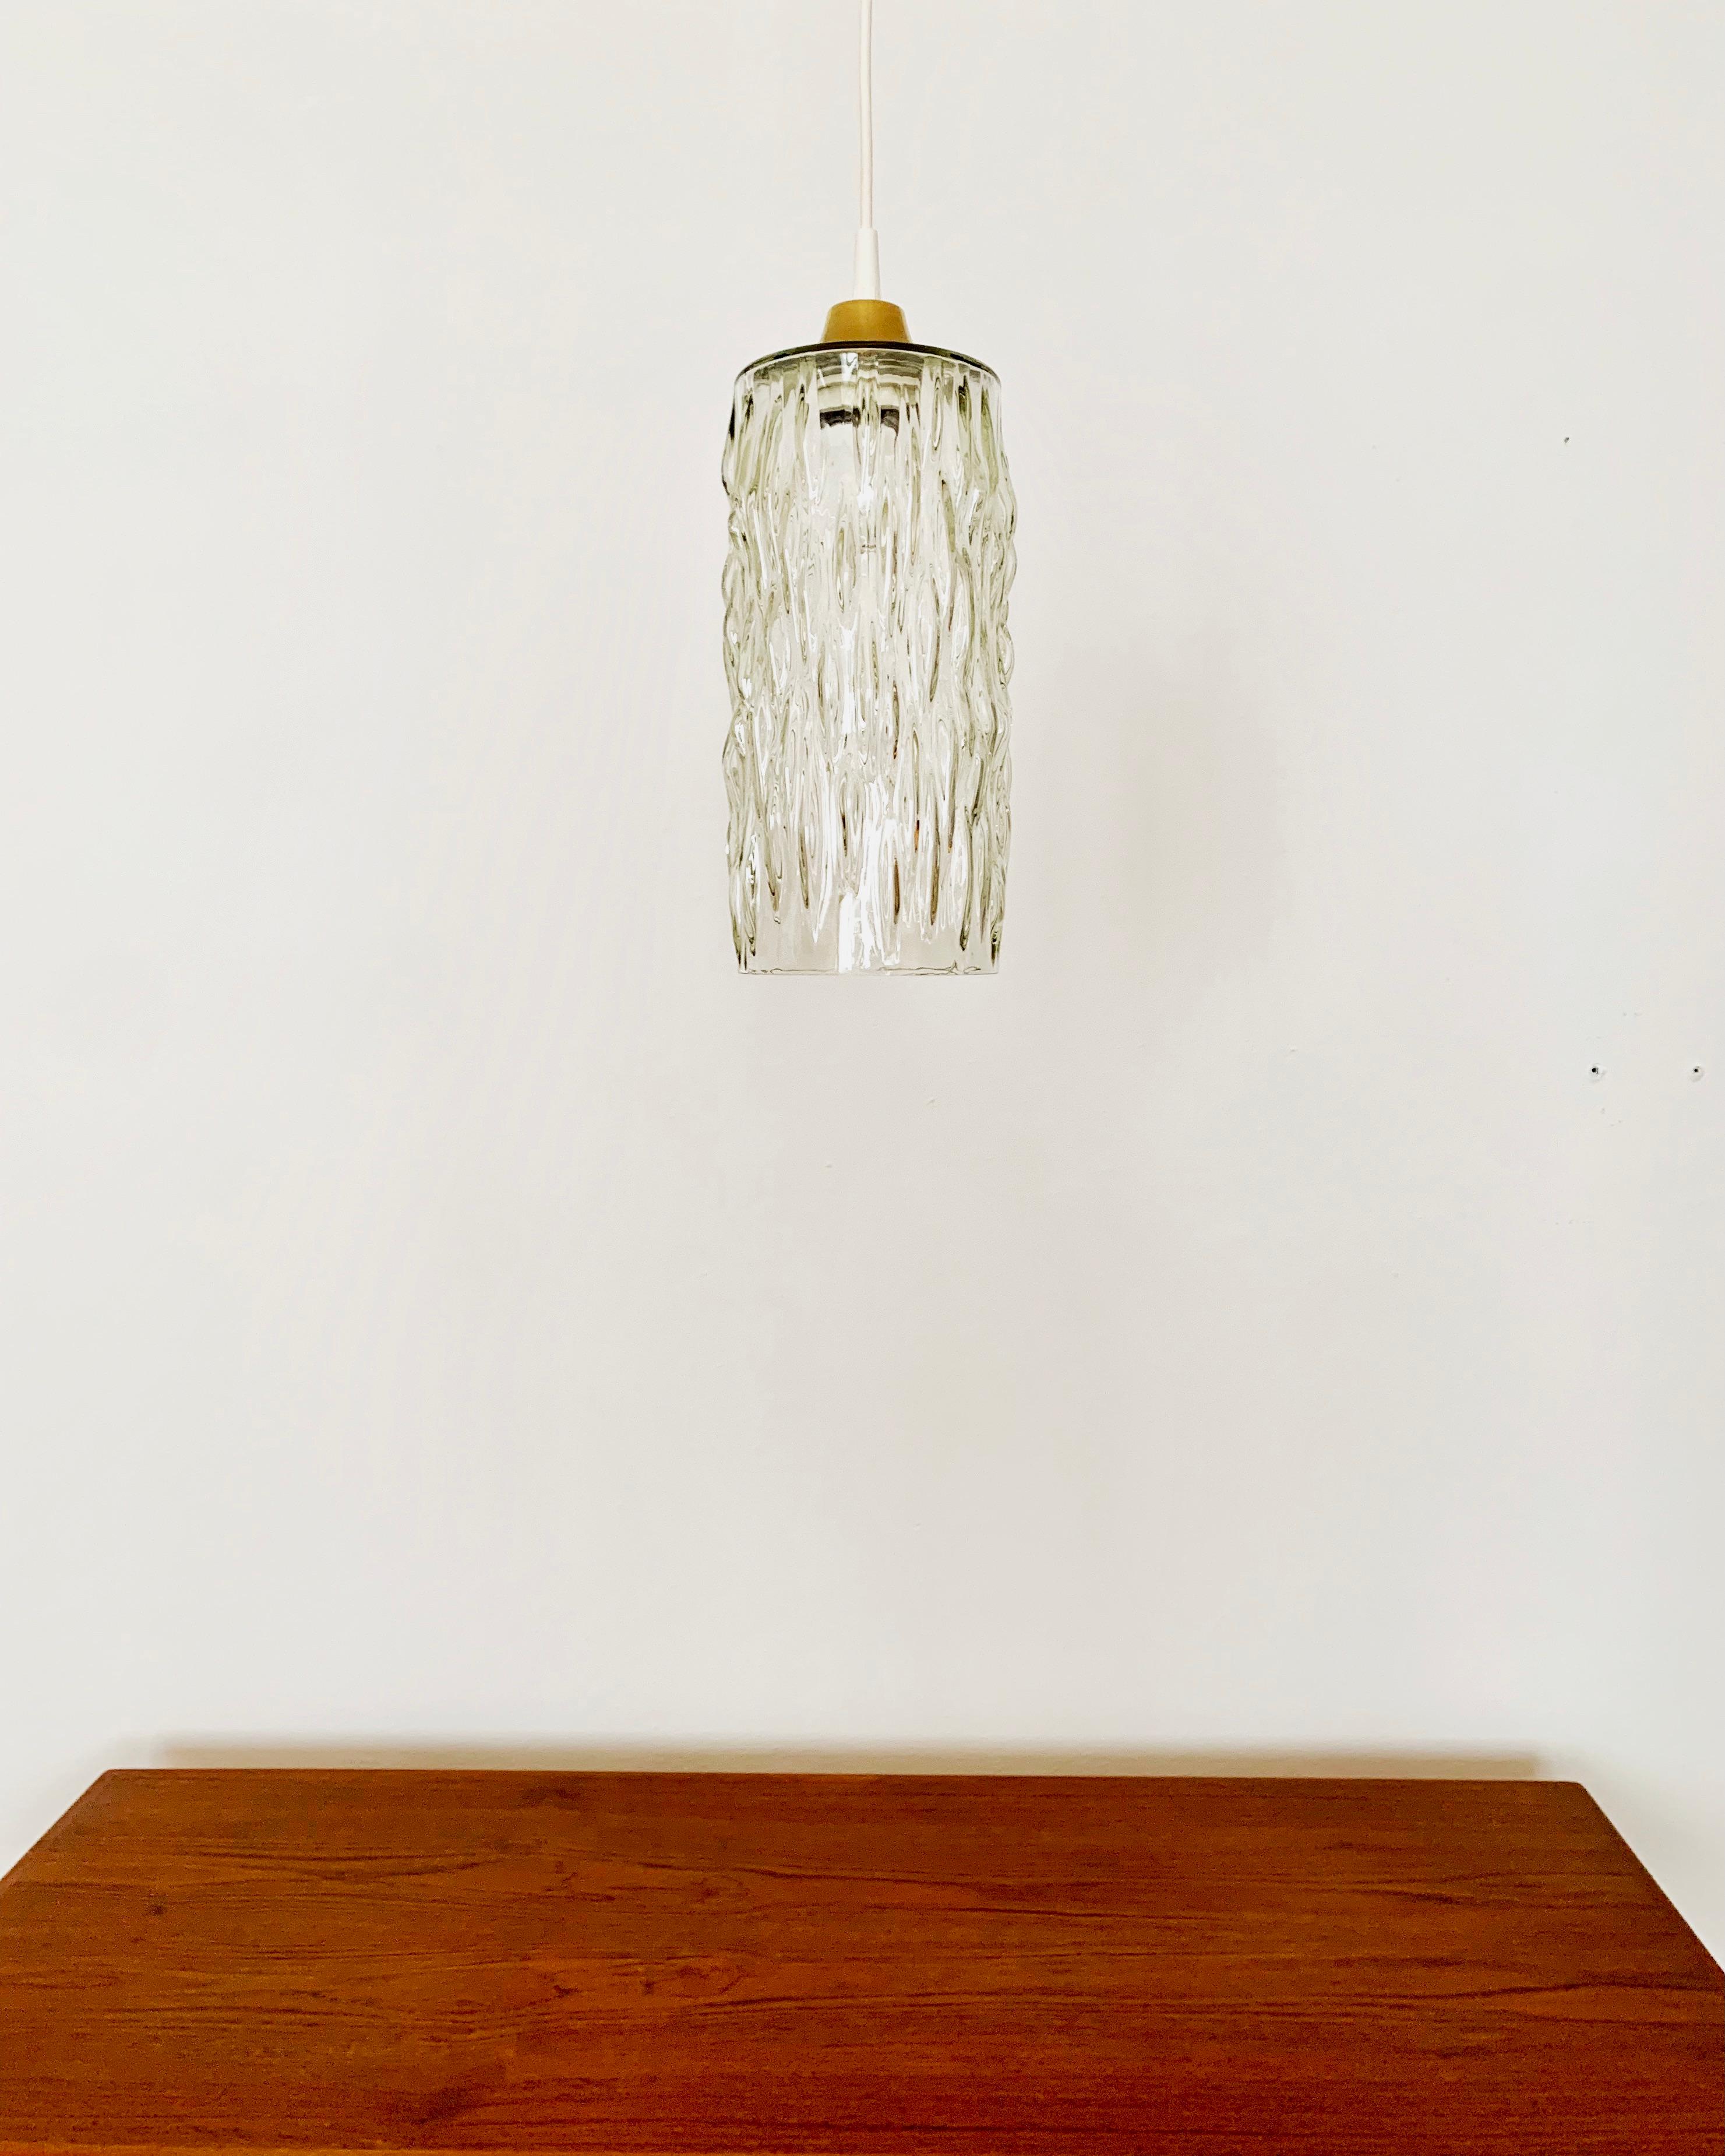 Set of 3 Crystal Glass Pendant Lamps In Good Condition For Sale In München, DE